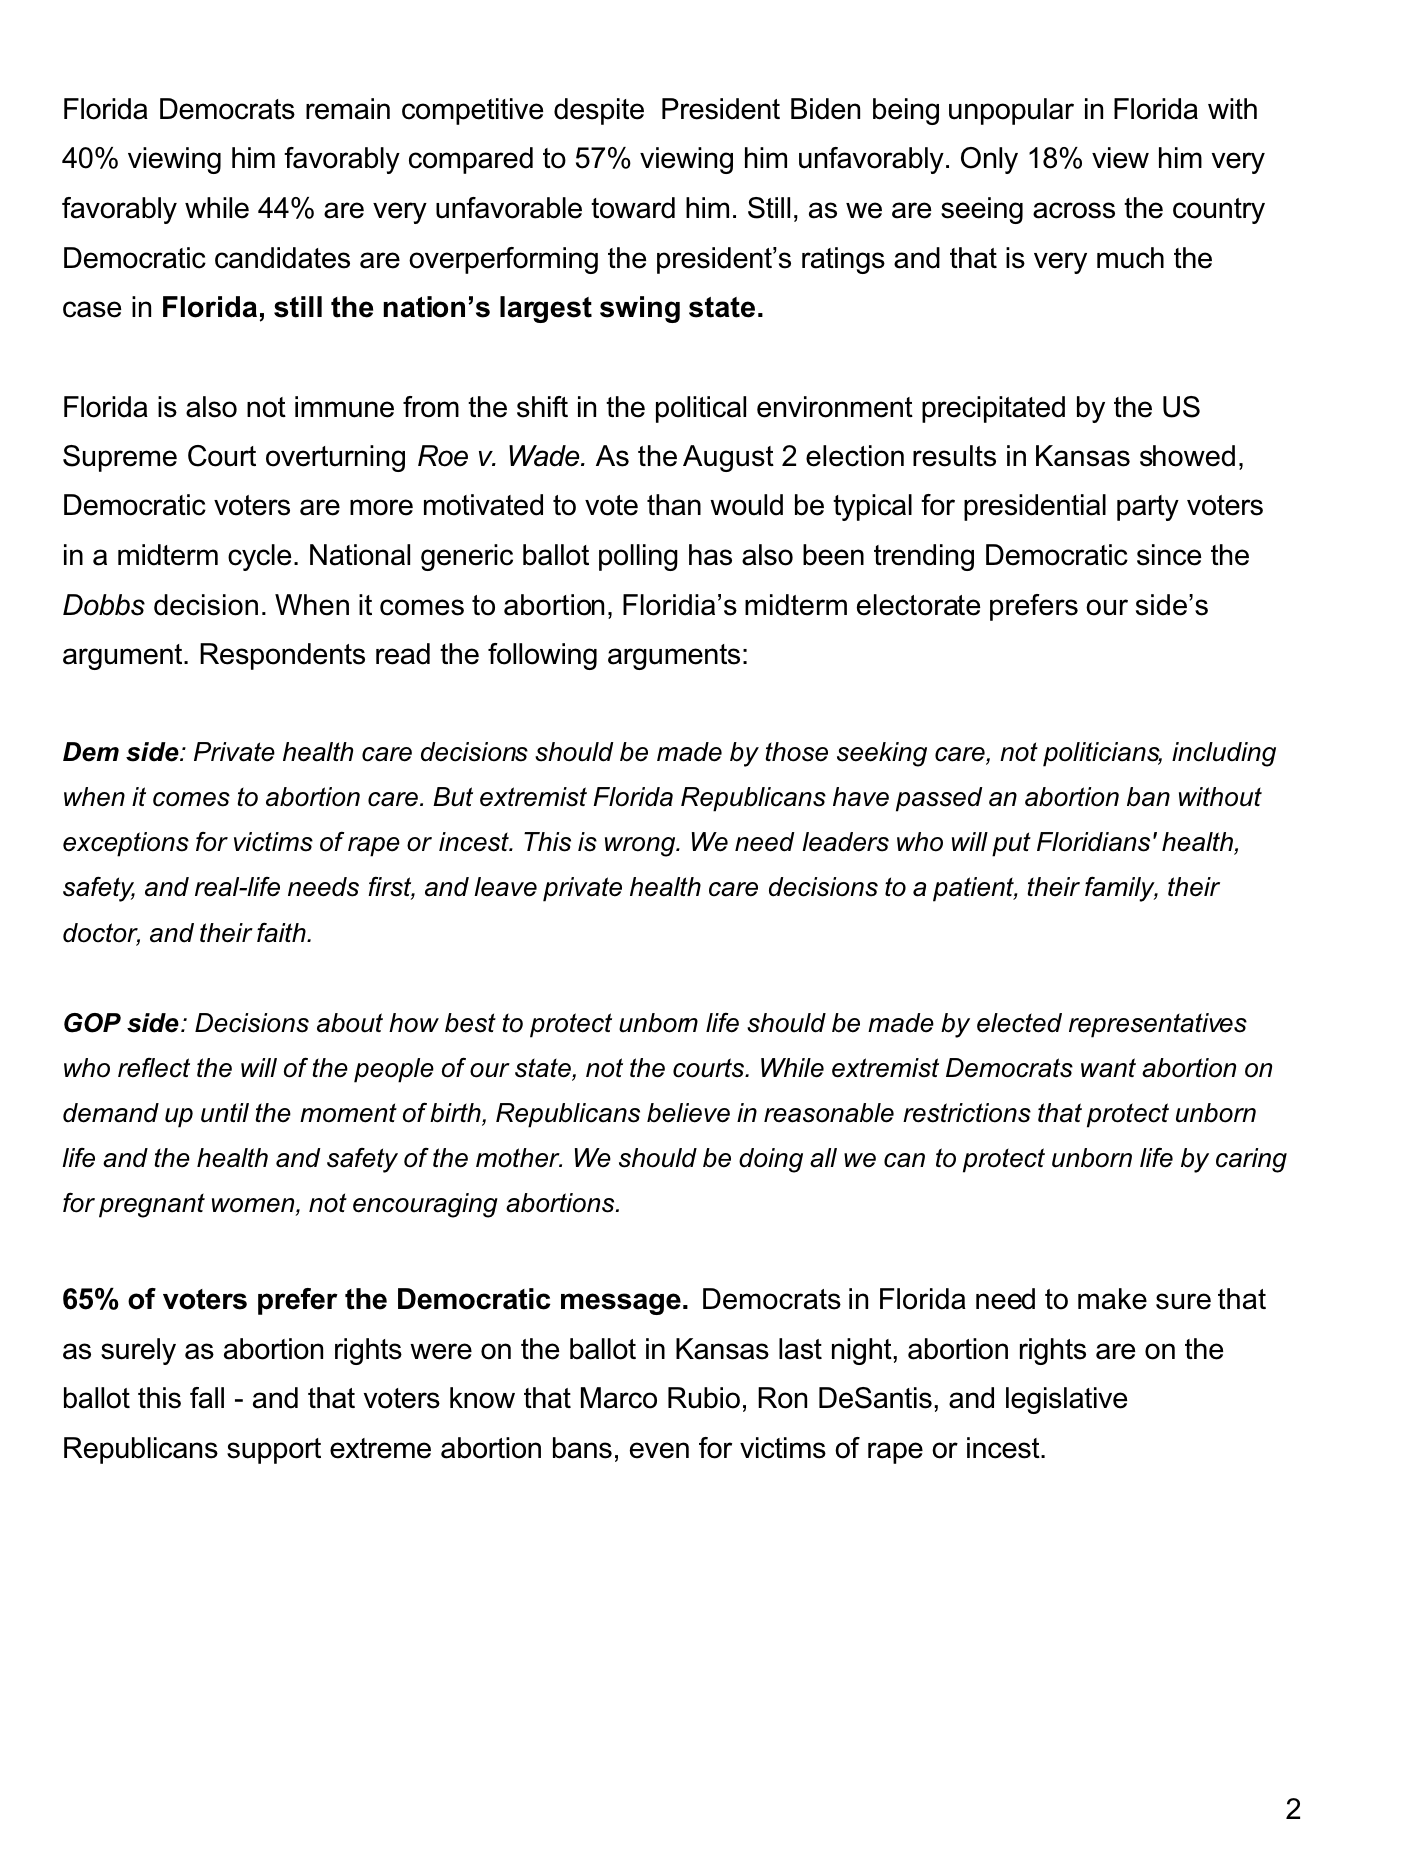 Screen-Shot-2022-08-08-at-1.58.03-PM Democrat Val Demings Surges Against Marco Rubio In Florida Poll Election 2022 Featured Politics Top Stories Women's Rights 